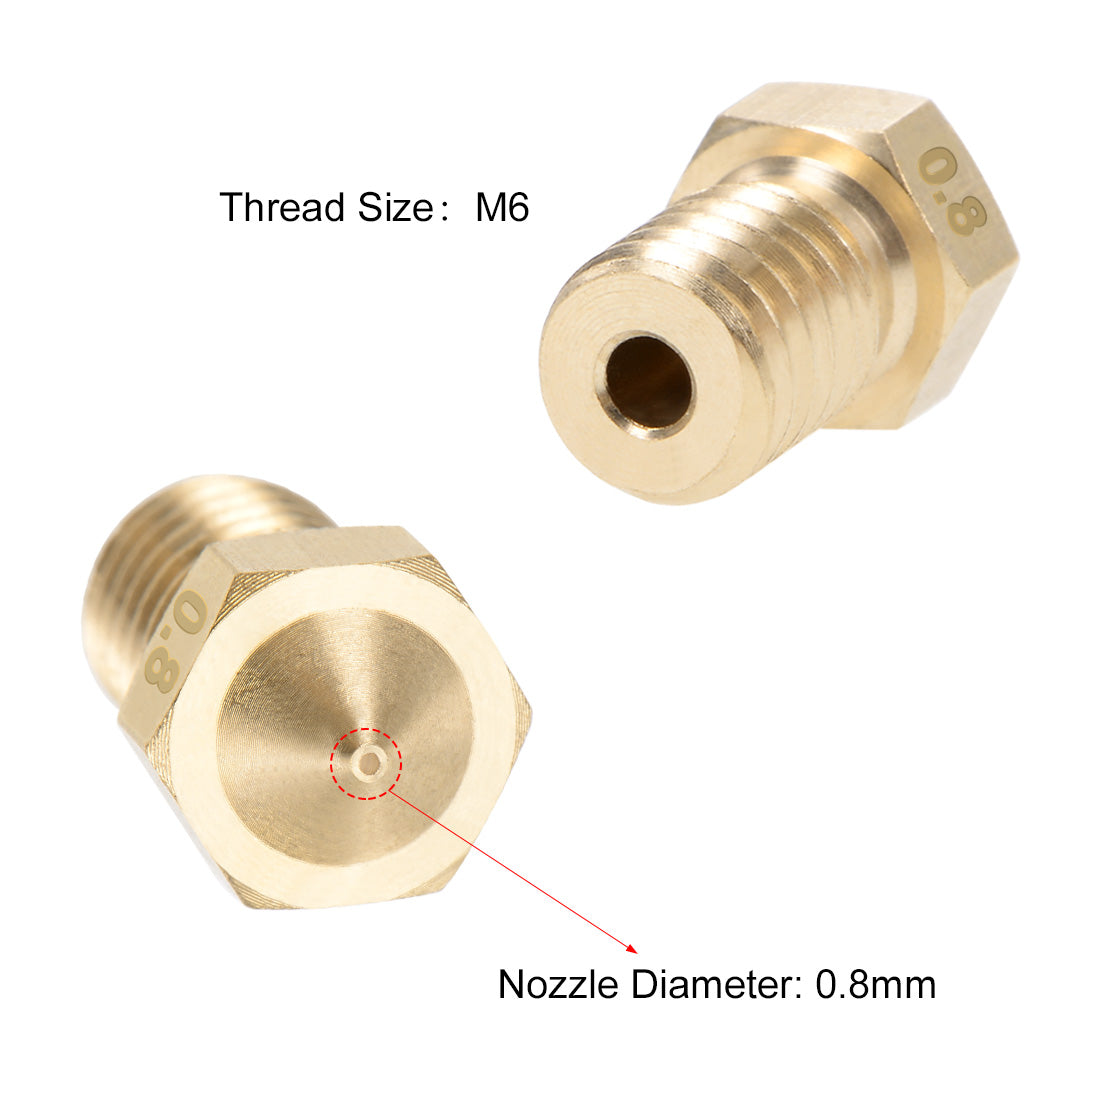 uxcell Uxcell 0.8mm 3D Printer Nozzle Head M6 for V5 V6 1.75mm Extruder Print, Brass 5pcs